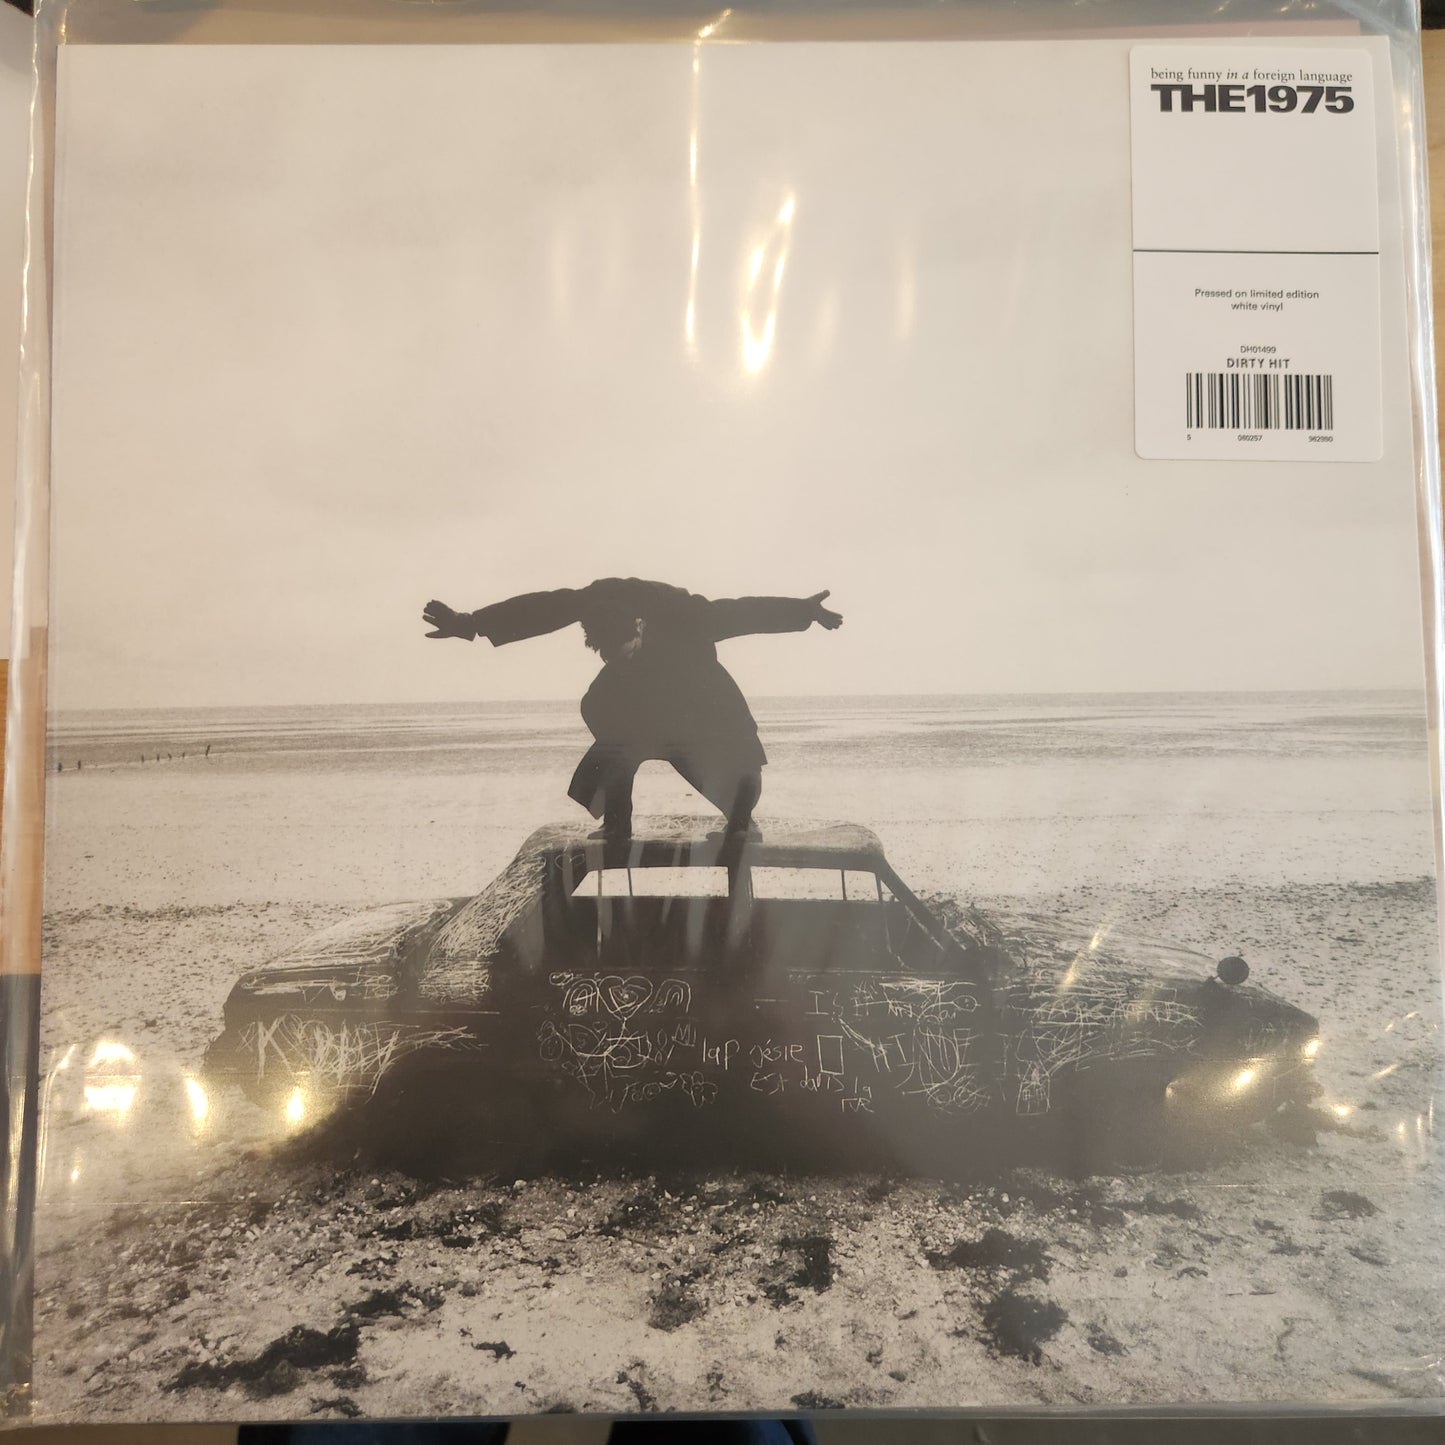 The 1975 - Being Funny in a Foreign Language - Limited Colour Vinyl